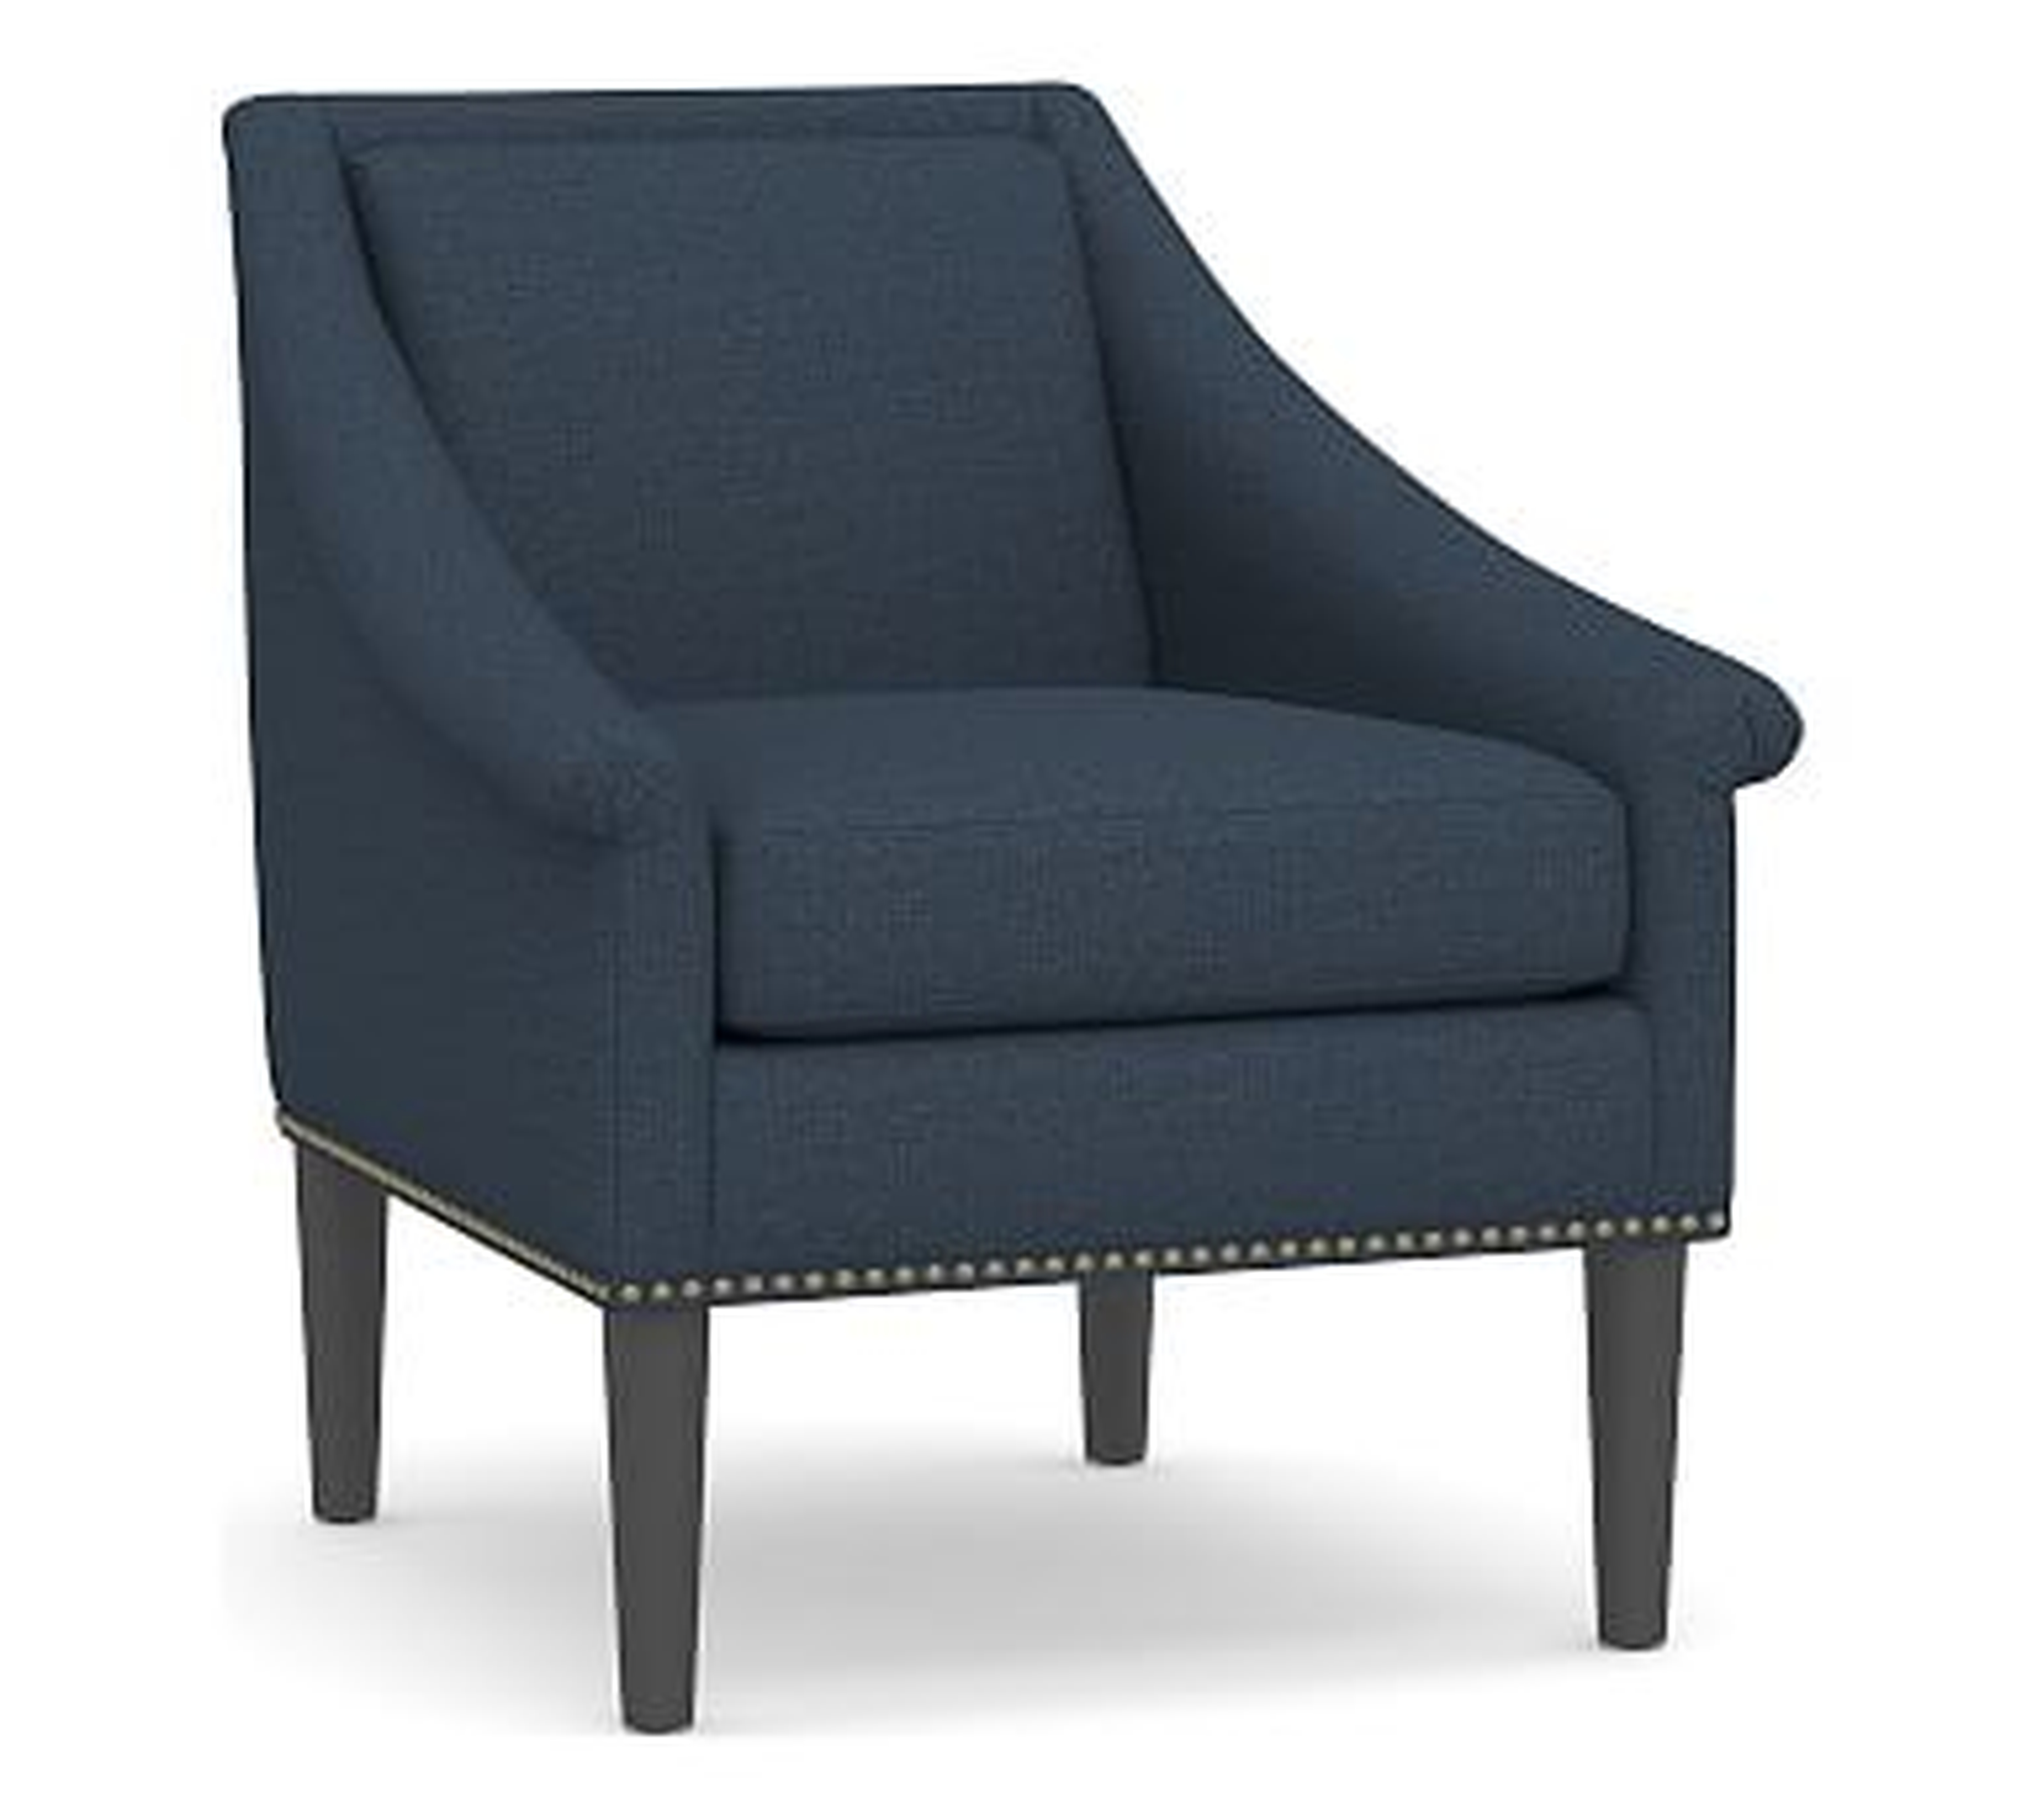 SoMa Valerie Upholstered Armchair, Polyester Wrapped Cushions, Brushed Crossweave Navy - Pottery Barn